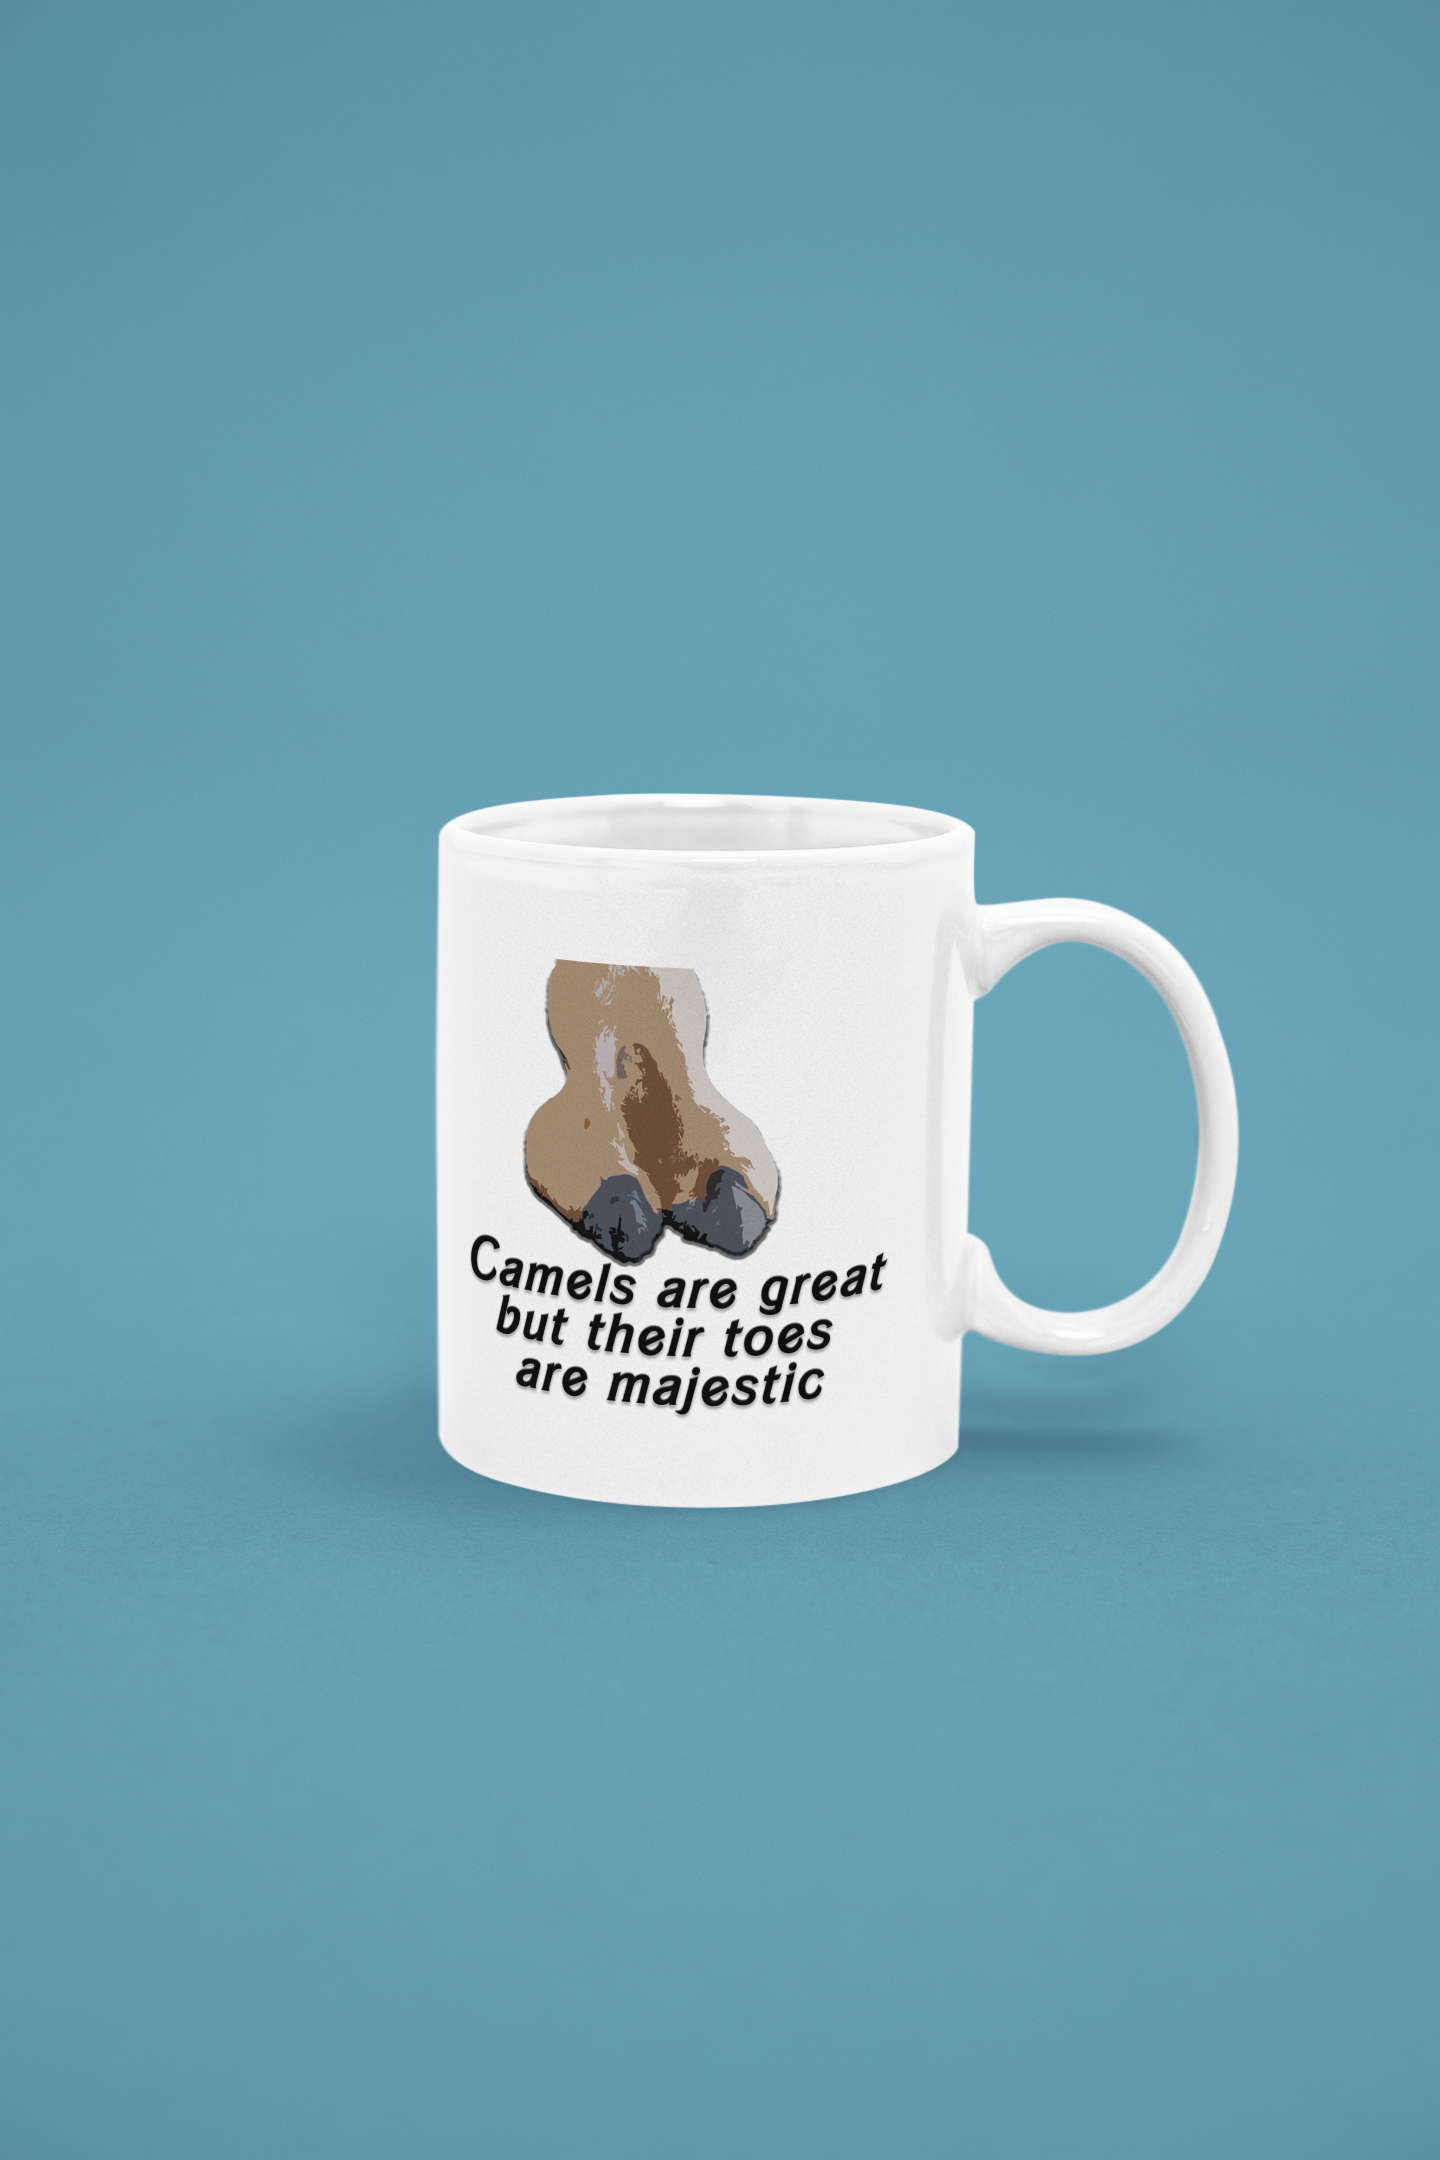 Camels are great but their toes are majestic - White glossy mug